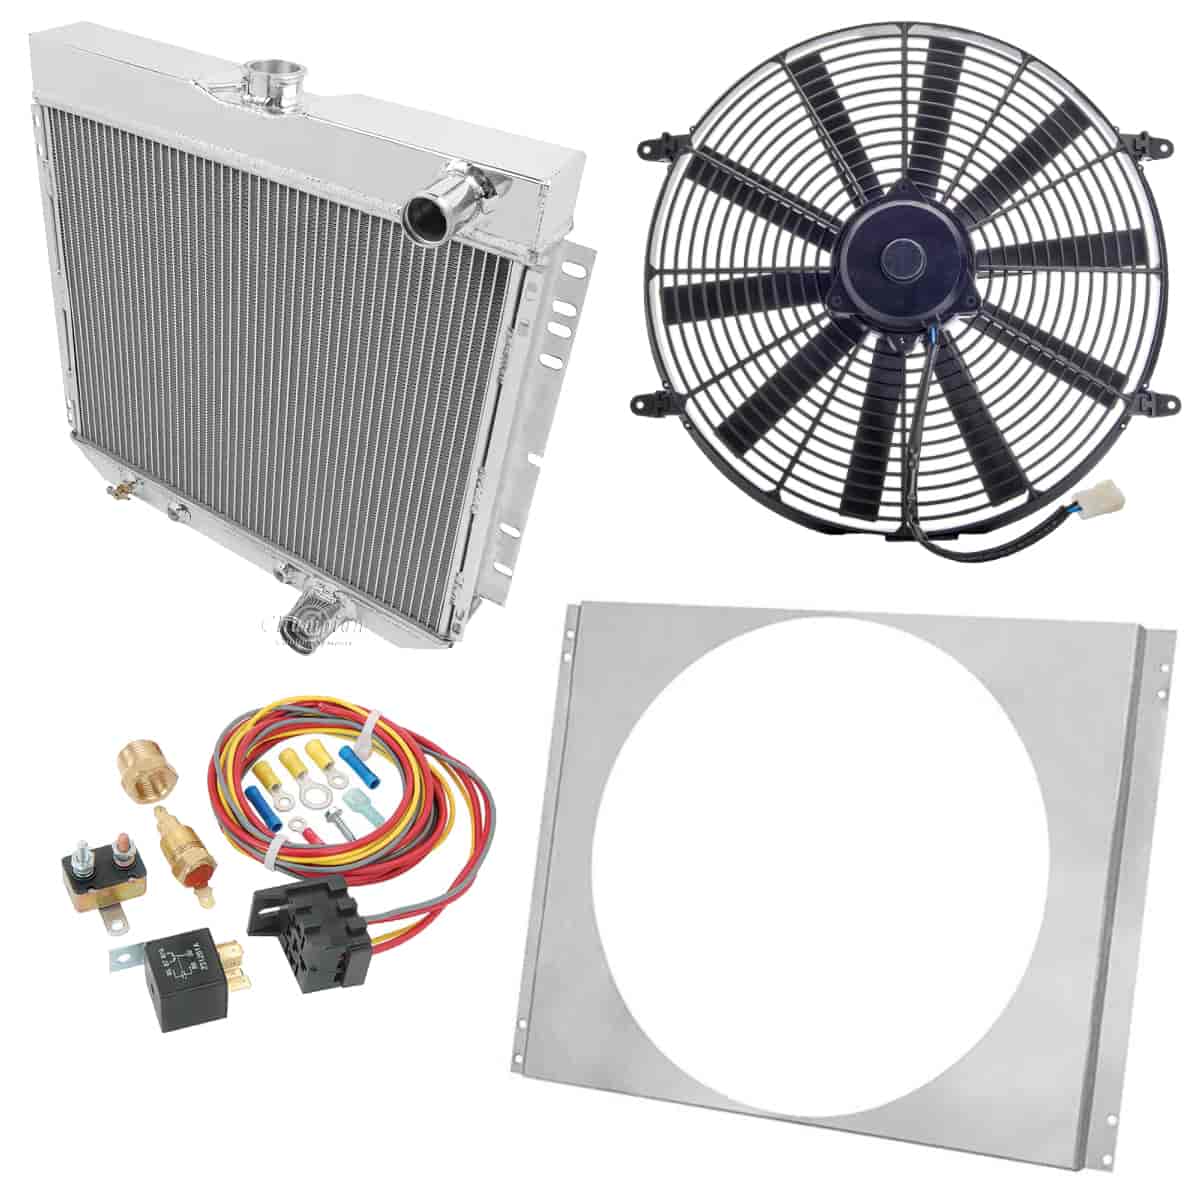 Radiator with Shroud and Fan Control Kit 1967-1970 Mustang & Cougar